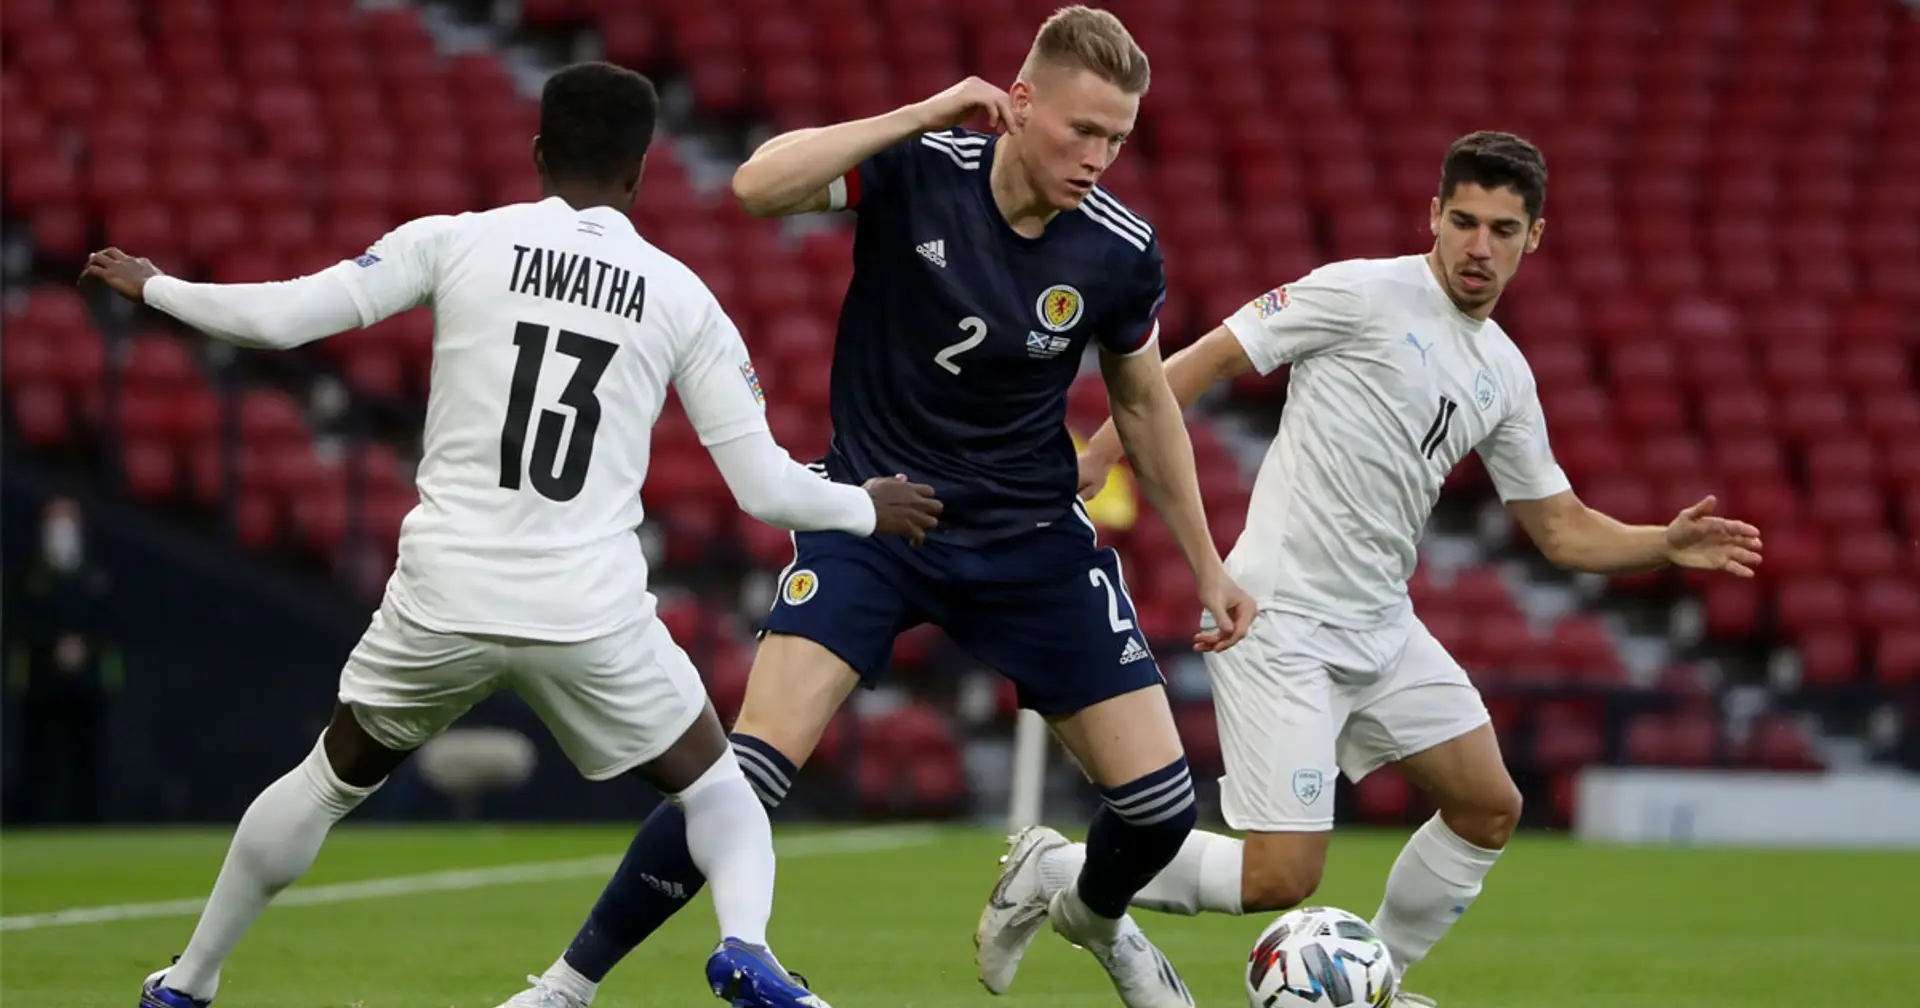 ‘What a waste!’: United fans unimpressed by McTominay playing as centre-back for Scotland in UEFA Nations League clash